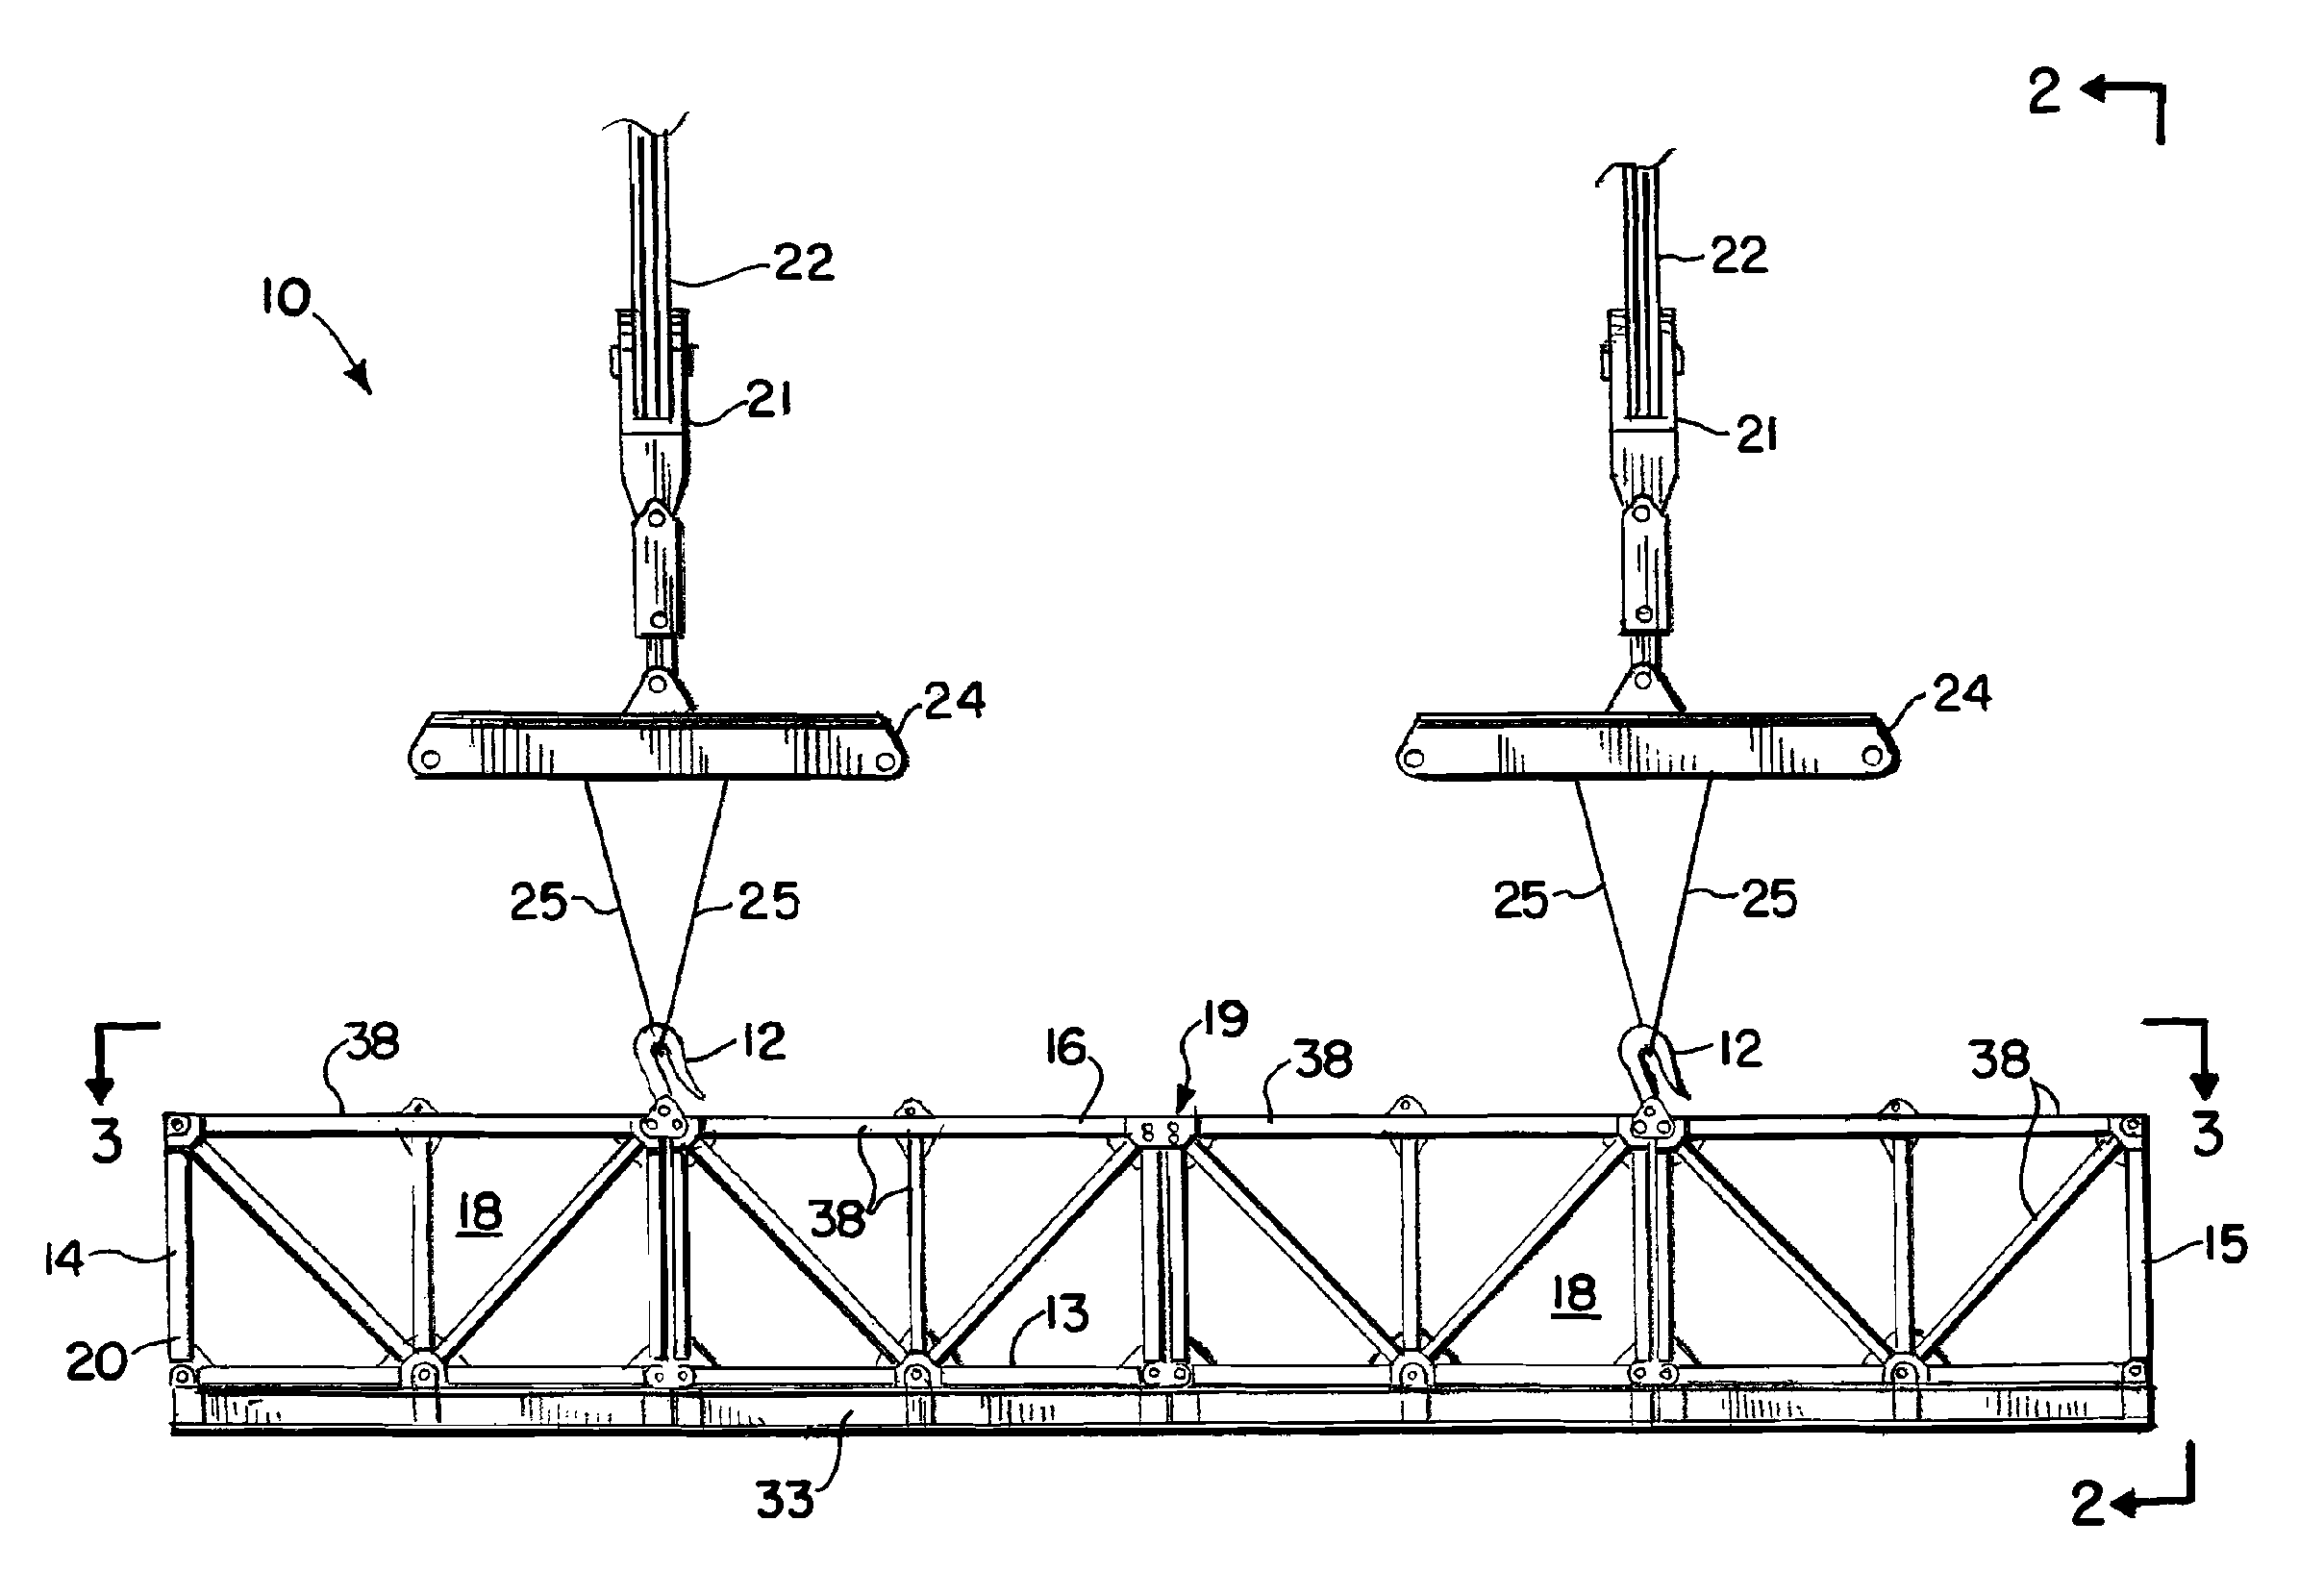 Method and apparatus for salvaging underwater objects